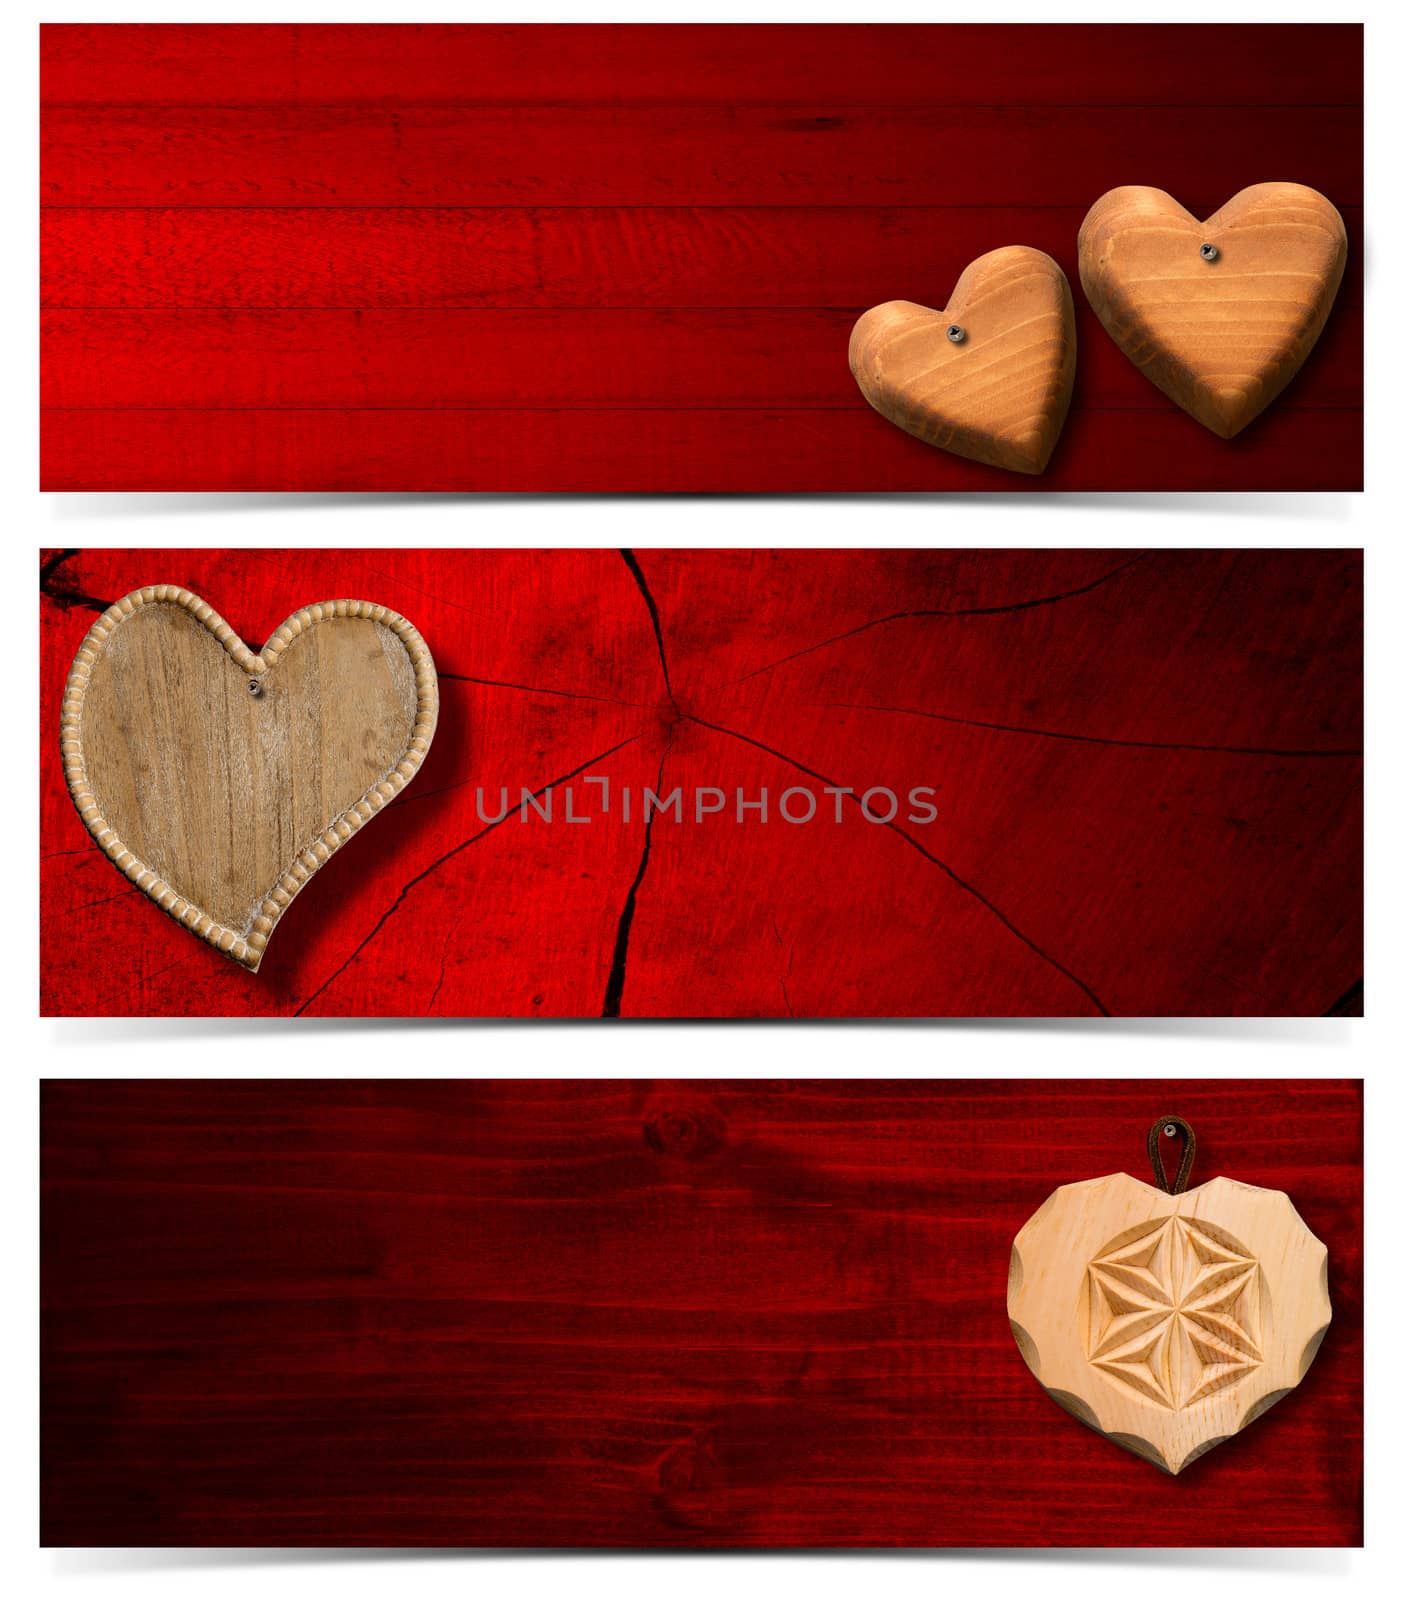 Handmade wooden hearts hanging on red wooden background - Three banners
